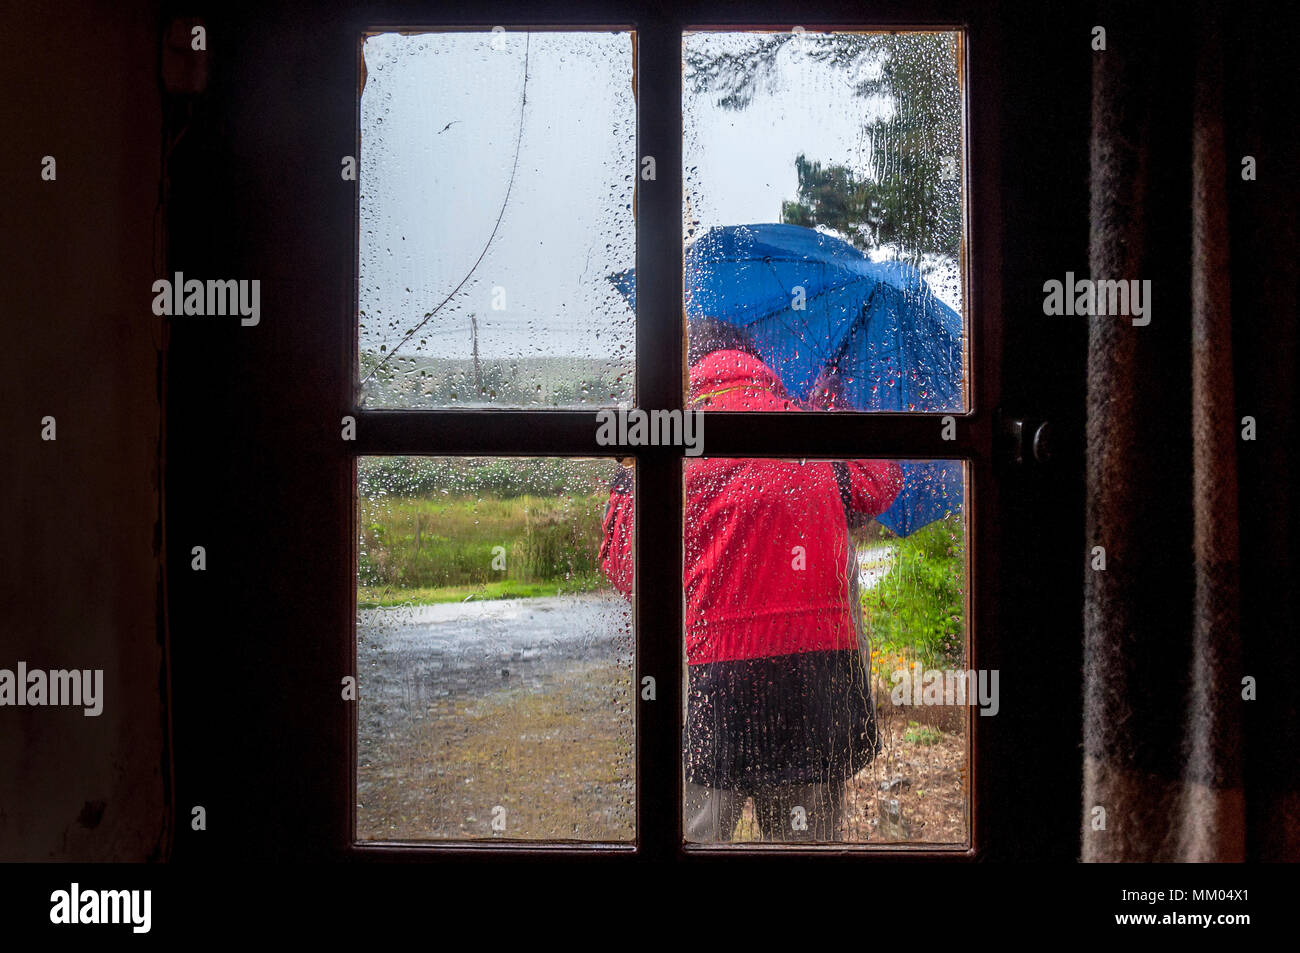 Ardara, County Donegal, Ireland  weather. 9th May 2016. A person struggles to work on a rainy, windy start to the day on Ireland's west coast. Seen through the window of a cottage. Credit: Richard Wayman/Alamy Live News Stock Photo